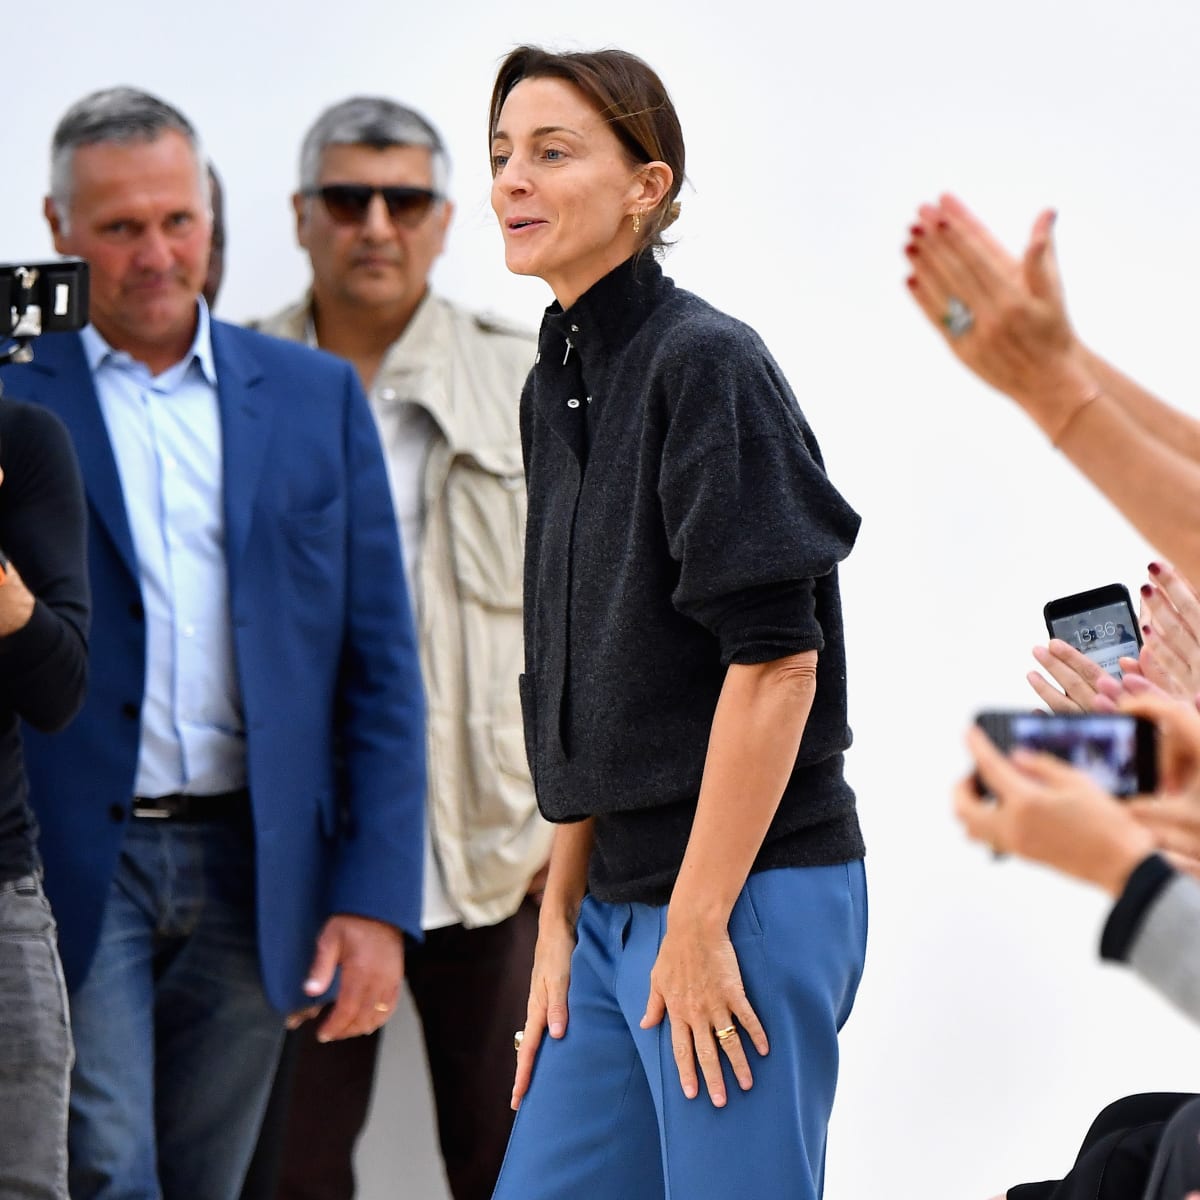 Fashion designer Phoebe Philo to launch own brand in September